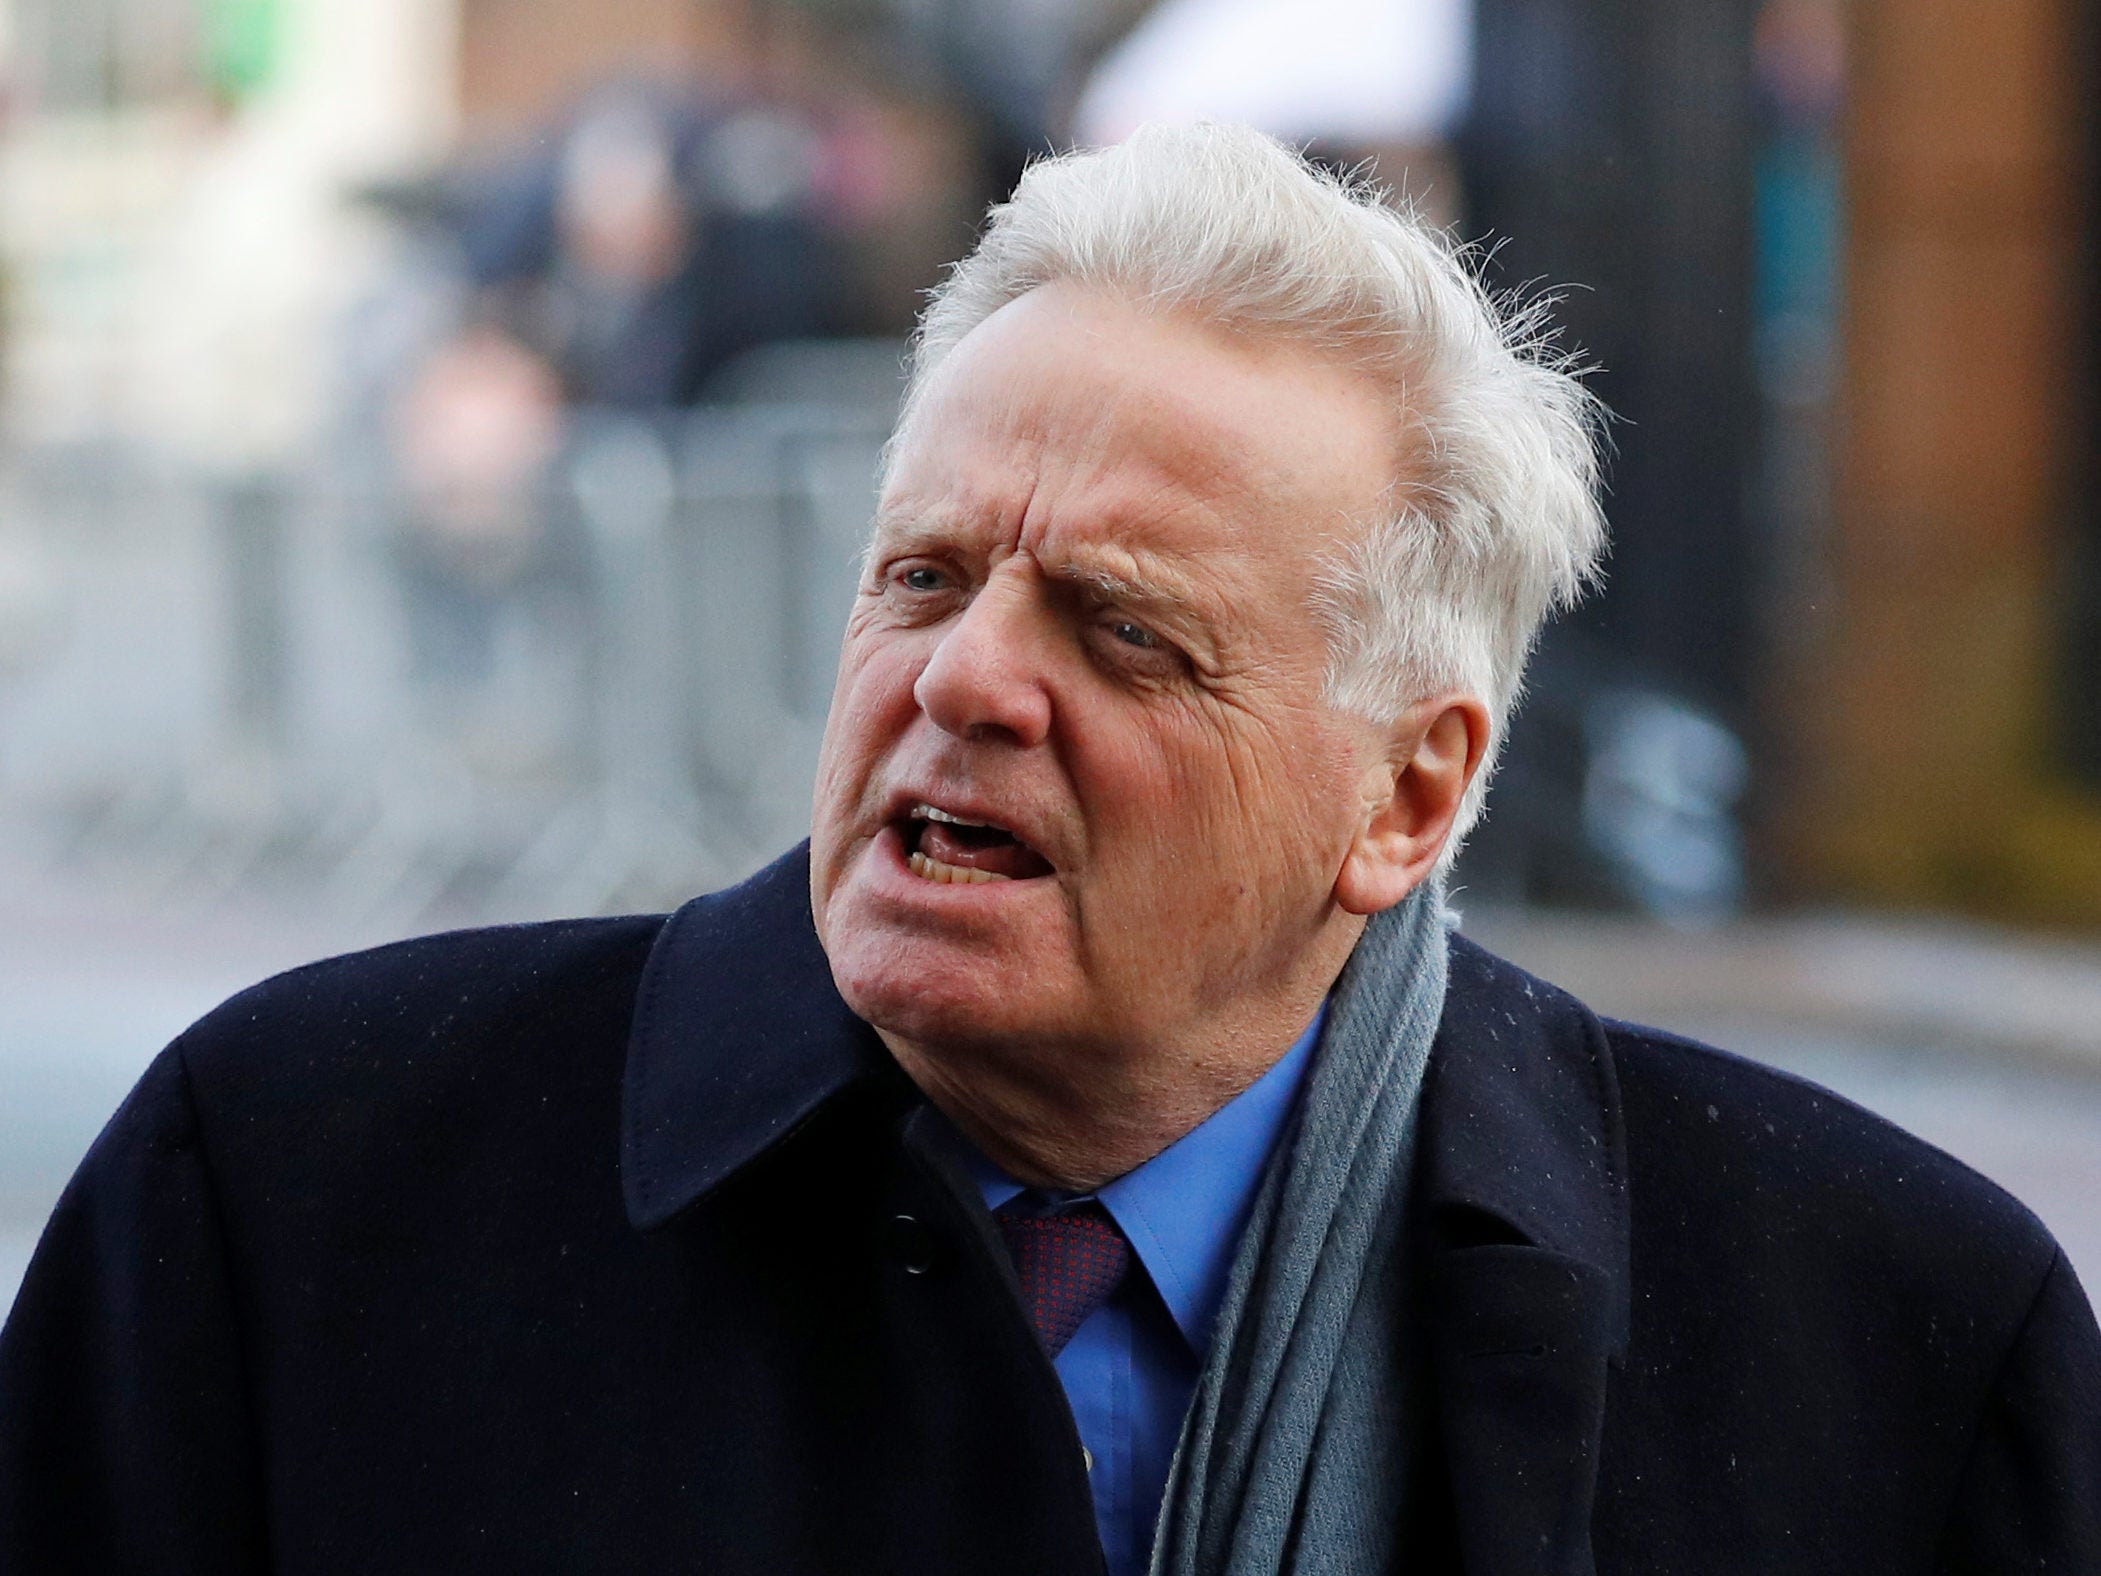 Former BBC and ITV chairman Michael Grade sees ‘no credible grounds’ to block Fox bid to takeover Sky